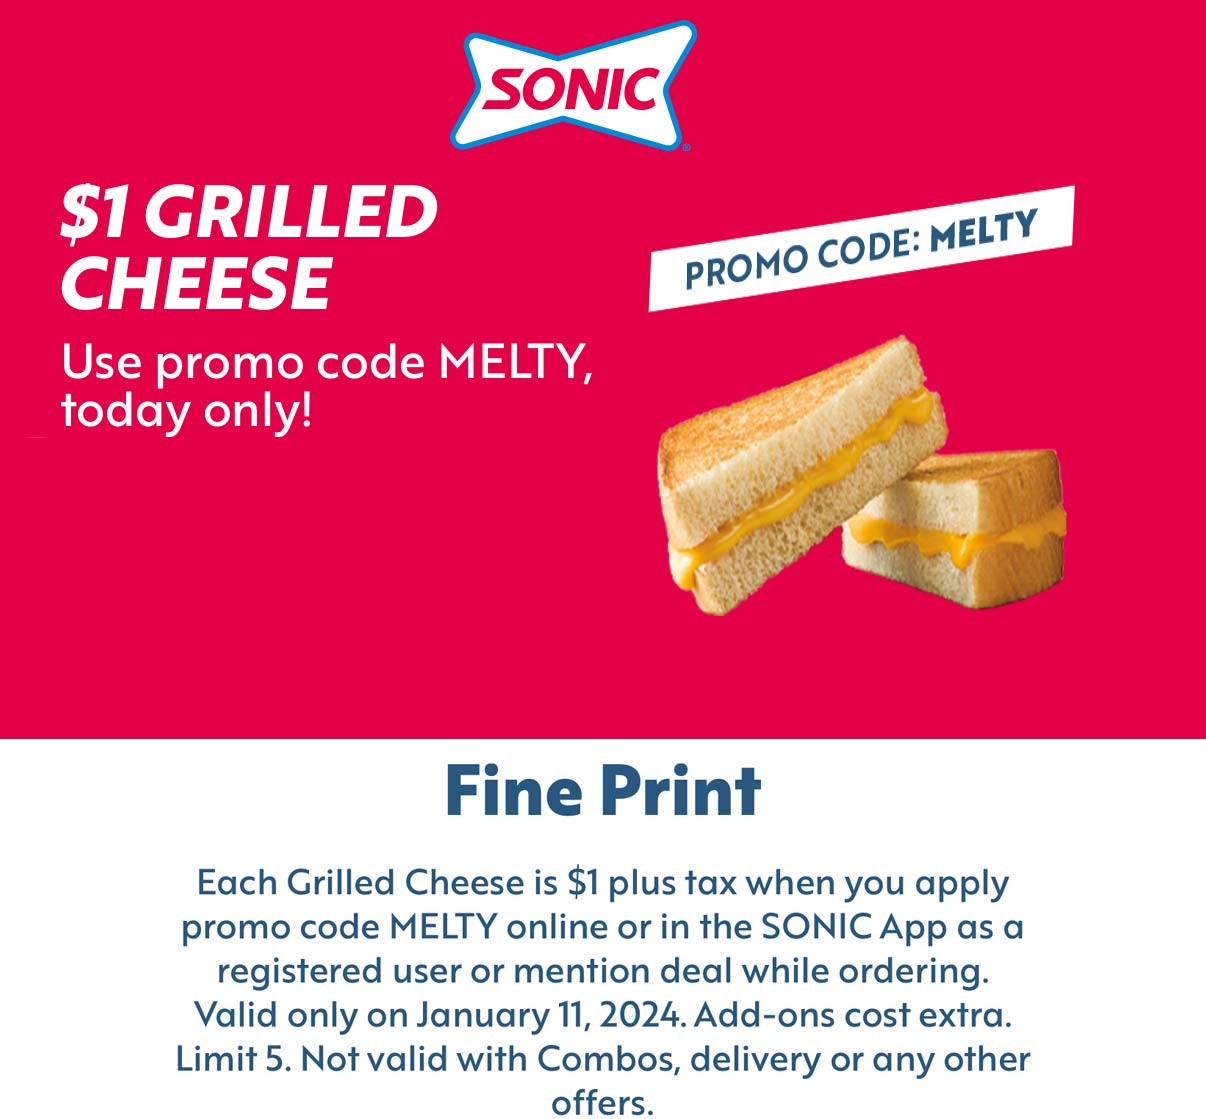 Sonic Drive-In restaurants Coupon  $1 grilled cheese today at Sonic Drive-In via promo code MELTY #sonicdrivein 